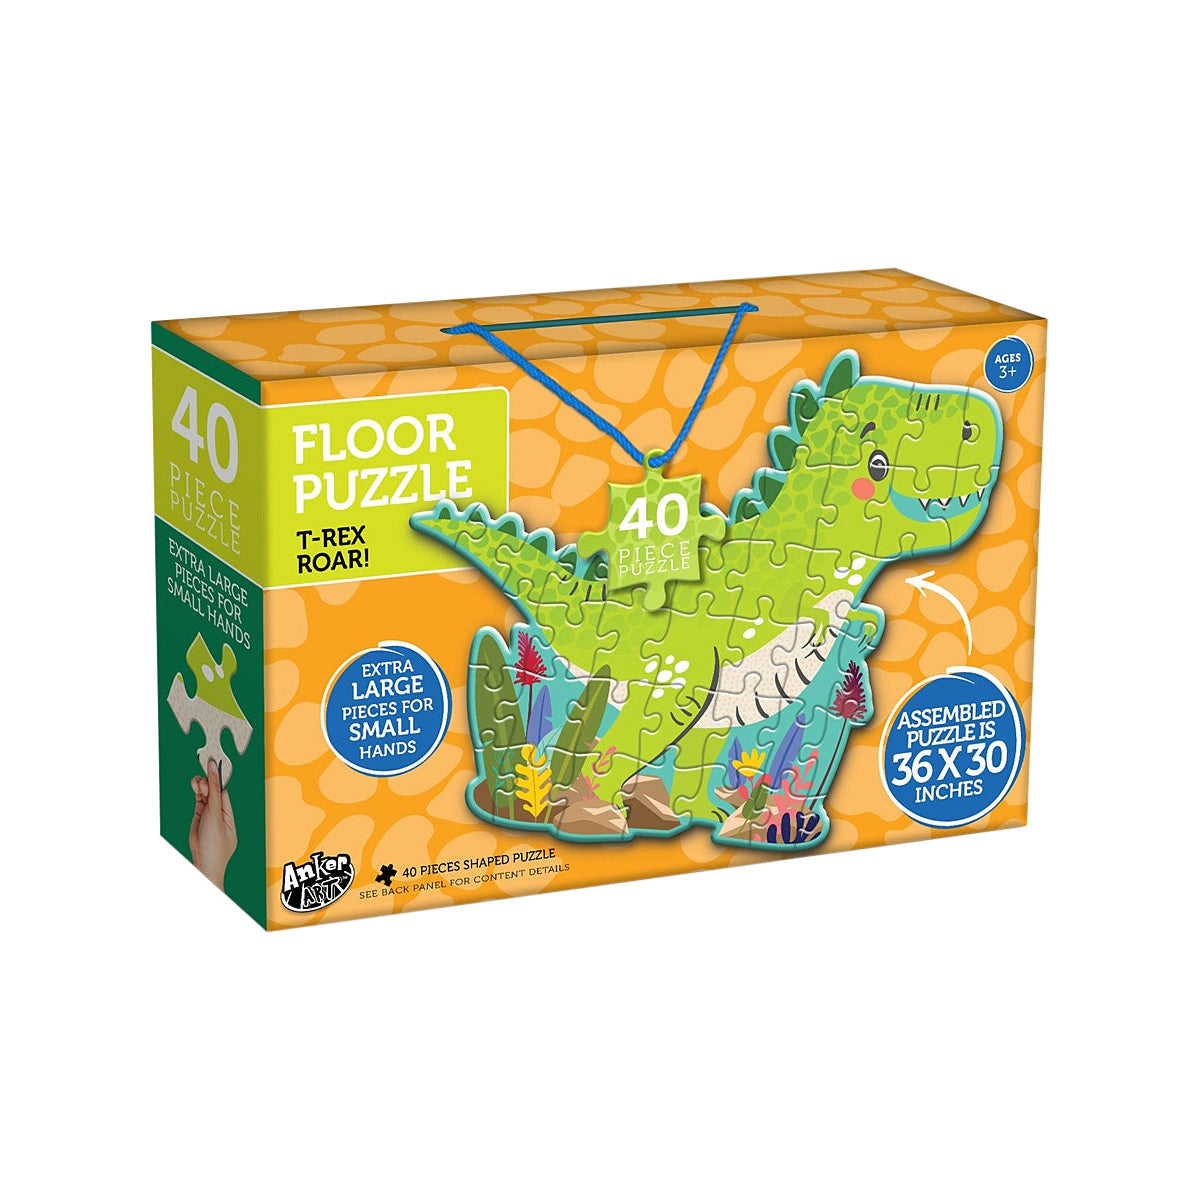 T-rex Puzzle Dinosaur Puzzle Dinosaur Gift for Kids Unique Kids Gift  Handmade Gift Puzzle Gift Jigsaw Puzzle 